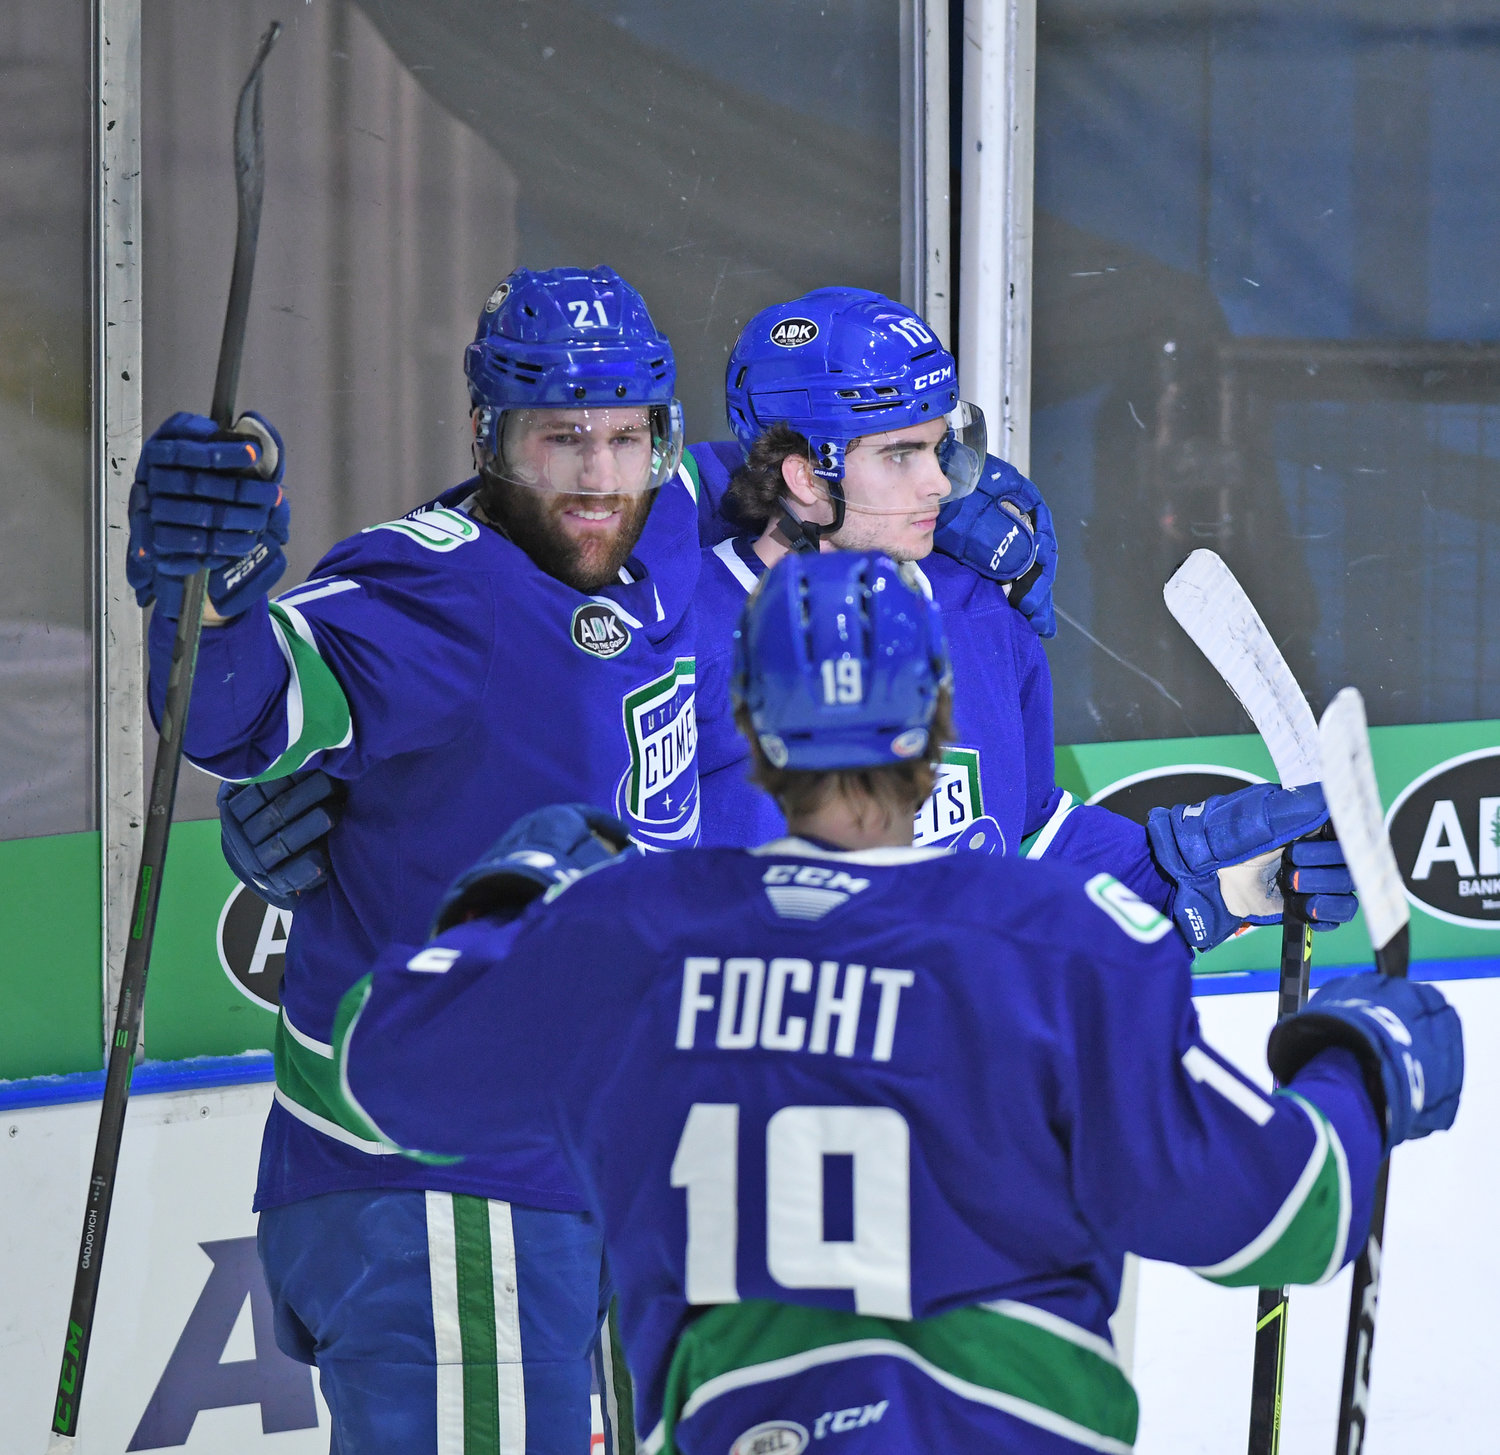 FIRST BLOOD — Jonah Gadjovich of the Utica Comets (21), celebrates with teammates Carson Focht (19) and Will Lockwood after he got the opening goal in Wednesday’s home opener against the Syracuse Crunch at the Utica Aud. Gadjovich added an empty net goal to seal a 5-2 win.